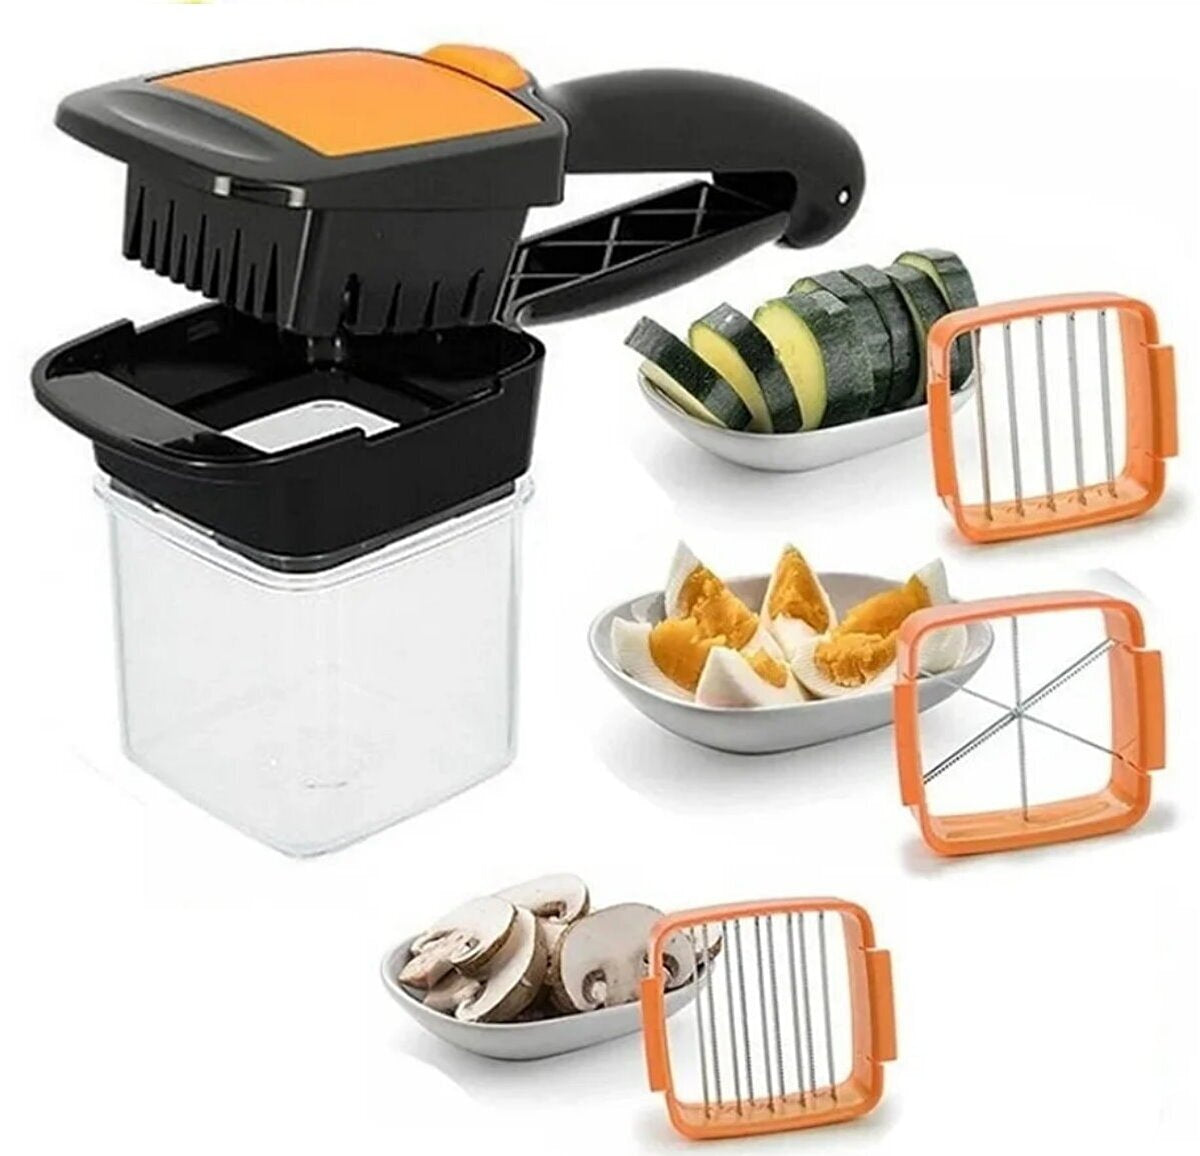 5-in-1 Nicer Dicer Quick, Multifunction Vegetable and Fruits Cutter